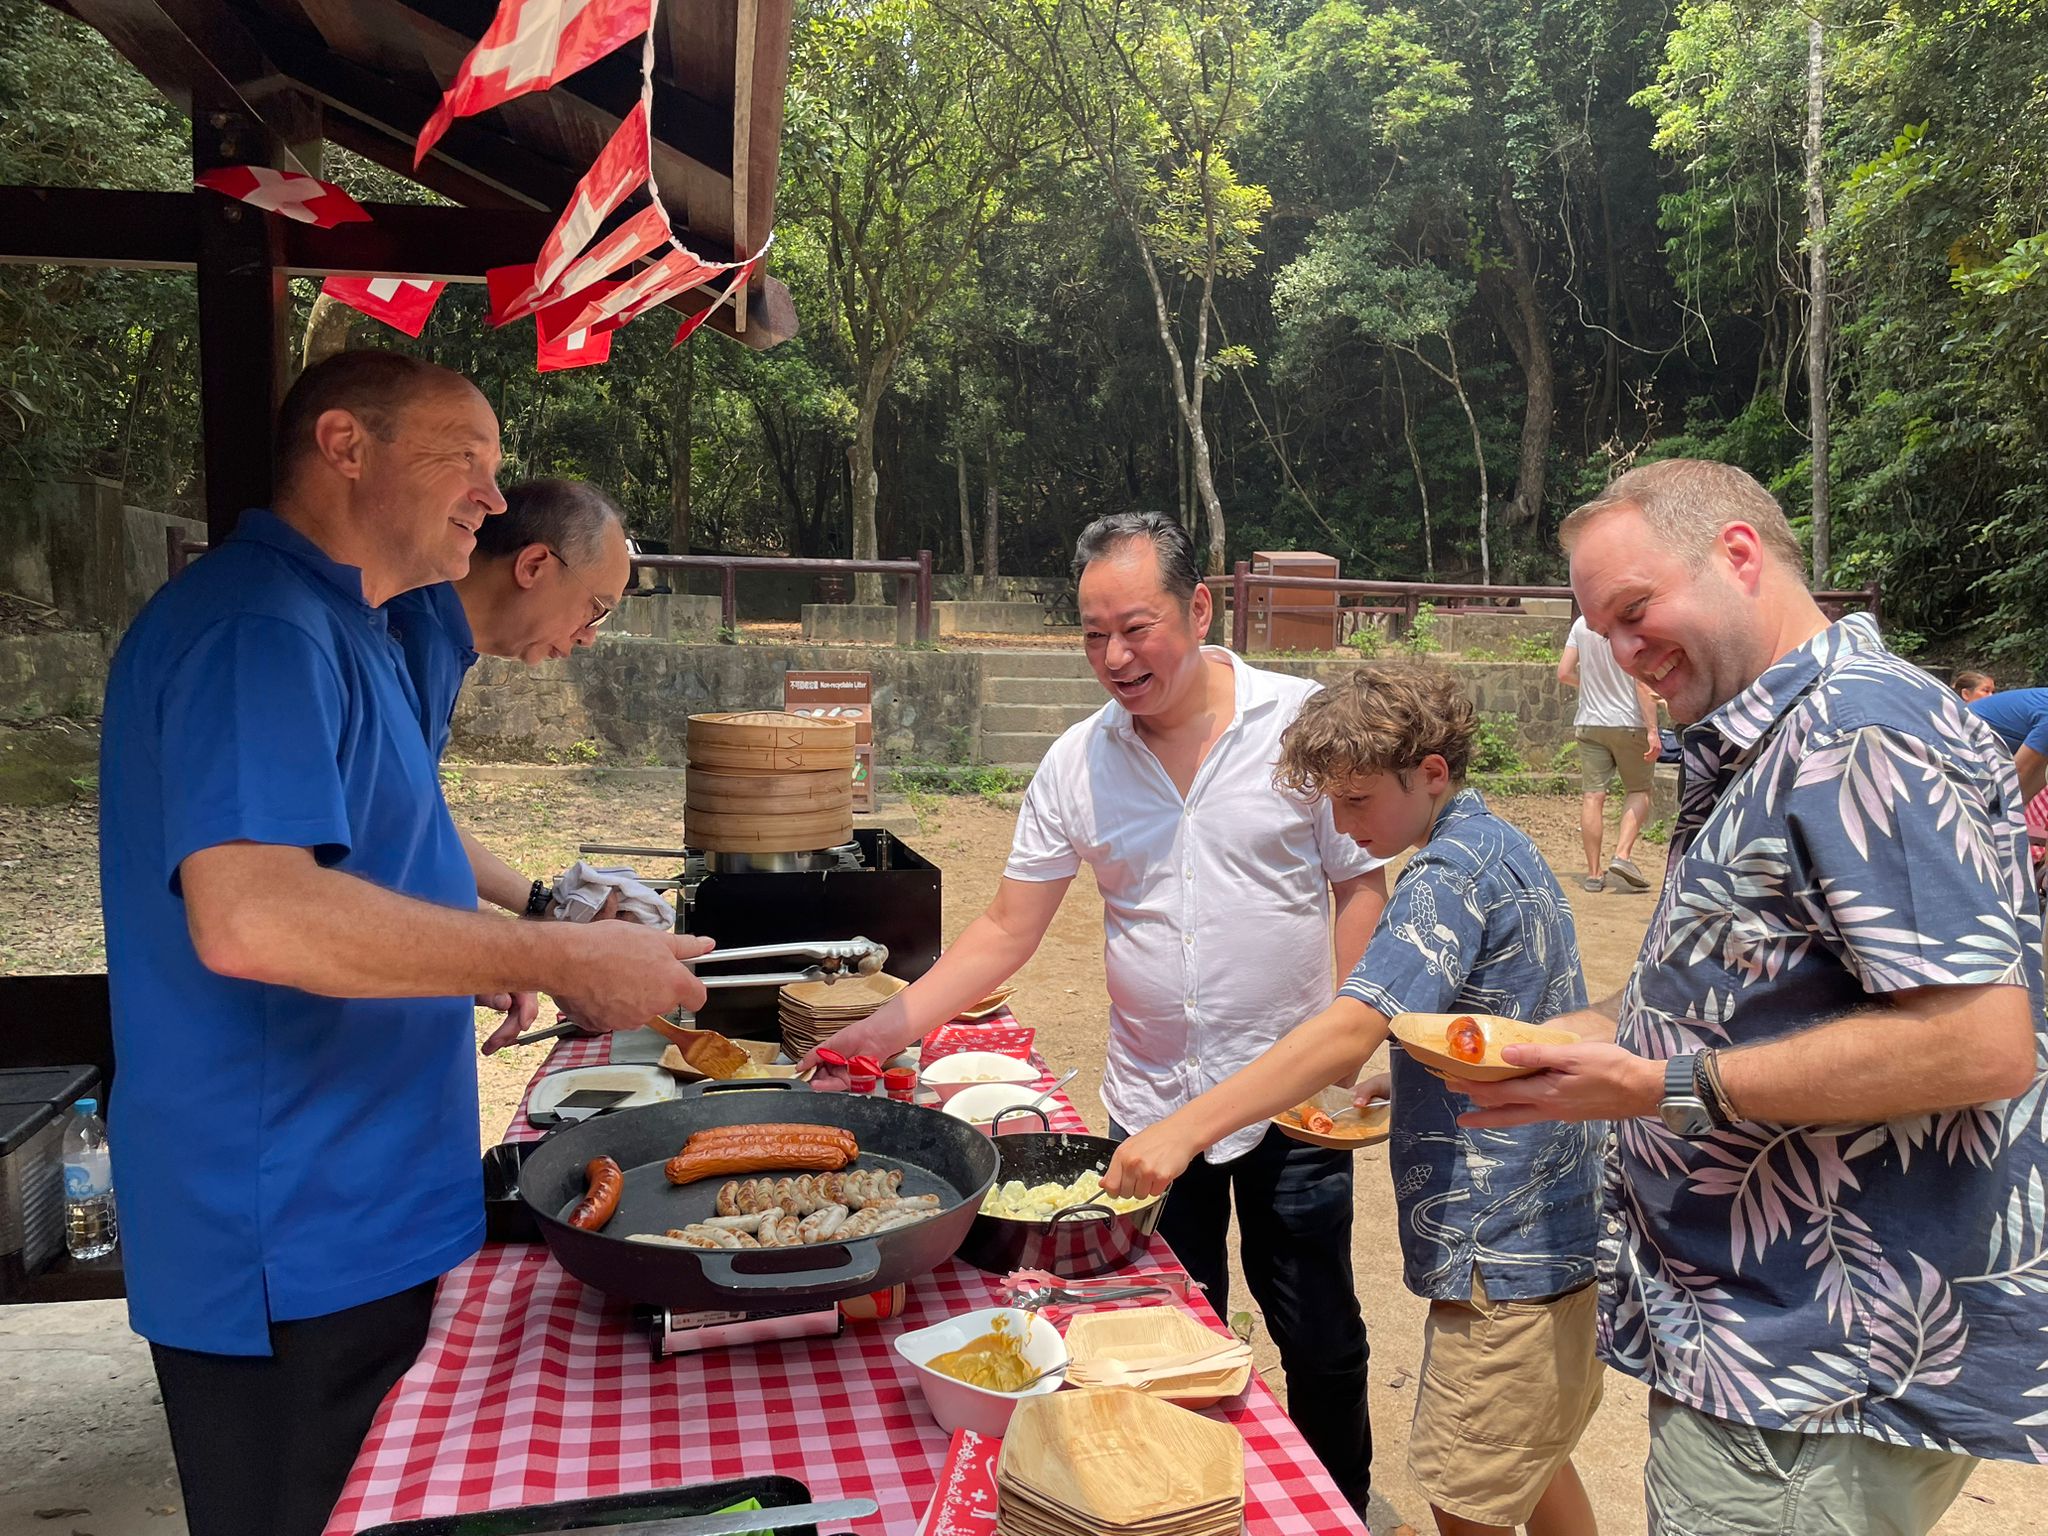 15 April 2023 – Raclette in the Park